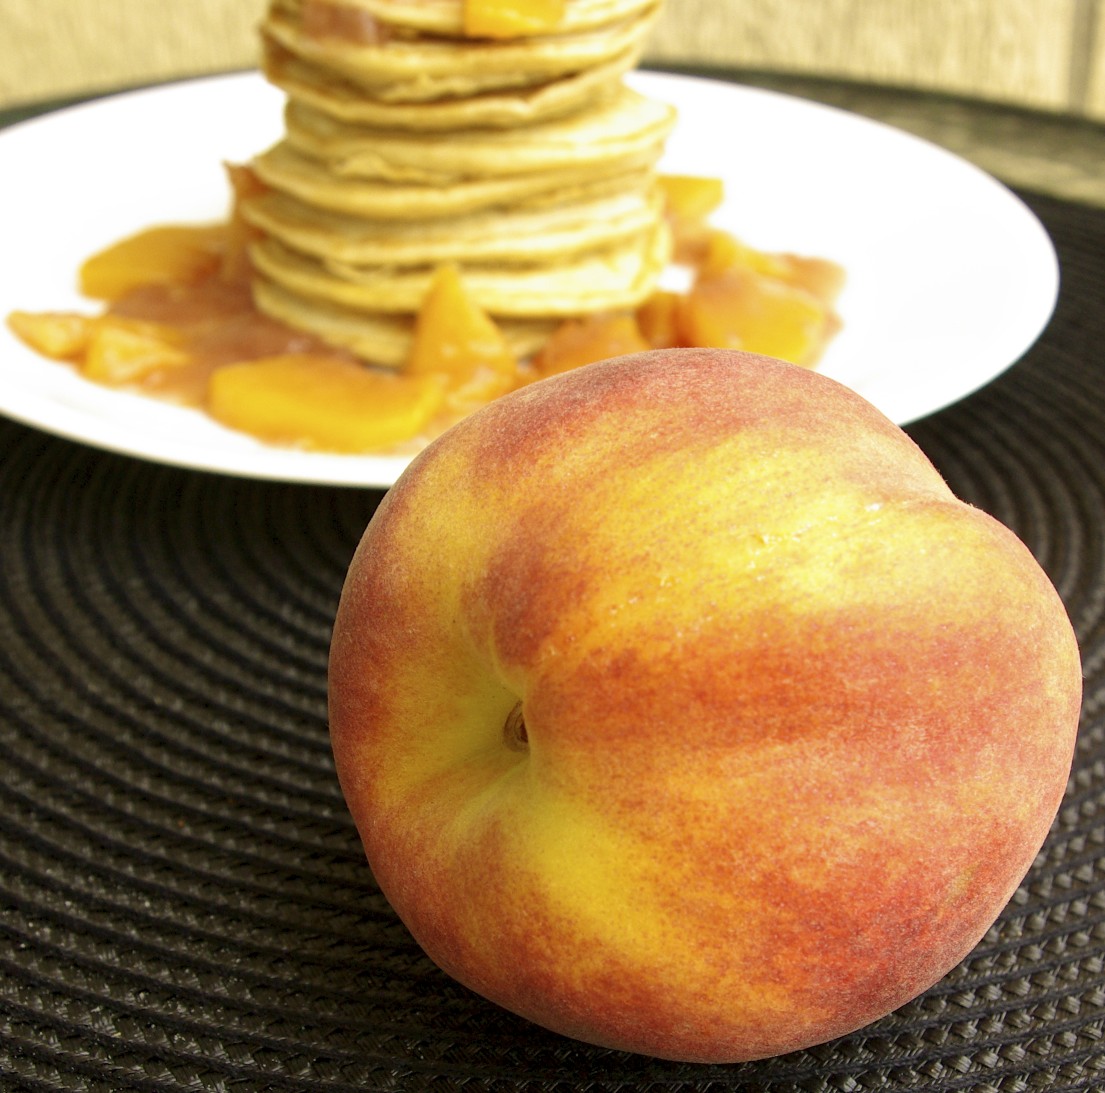 make ripened peach syrup syrup incredible perfectly how  peach peaches to make pancake to an pancake